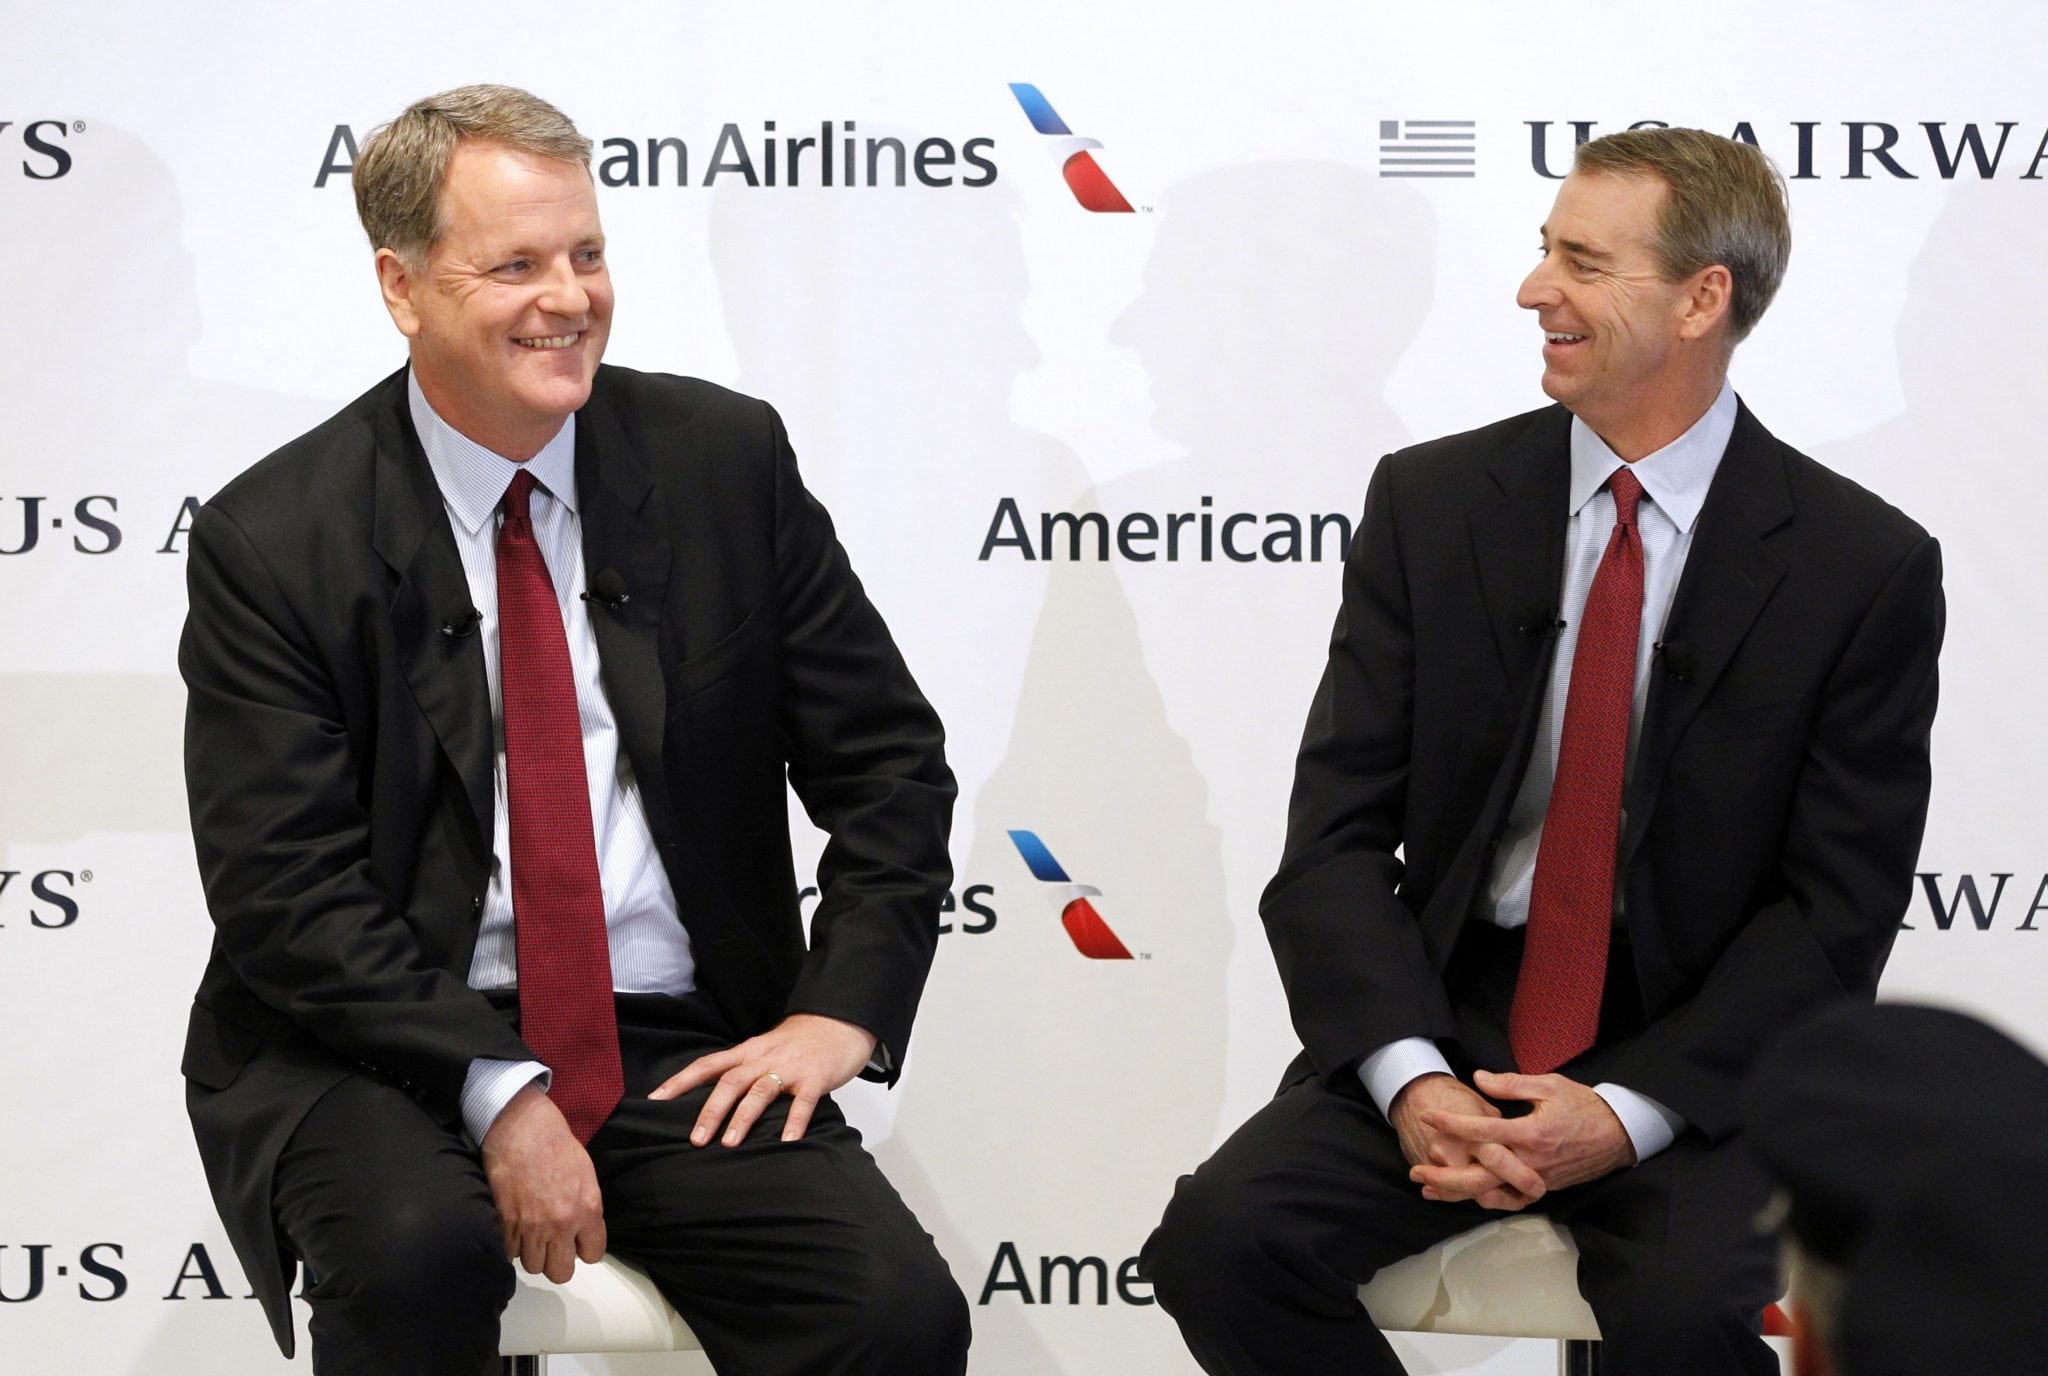 US Airways CEO Parker and American Airlines Chairman, President and CEO Horton announce the planned merger of American Airlines and US Airways during a news conference at Dallas-Ft Worth International Airport. 